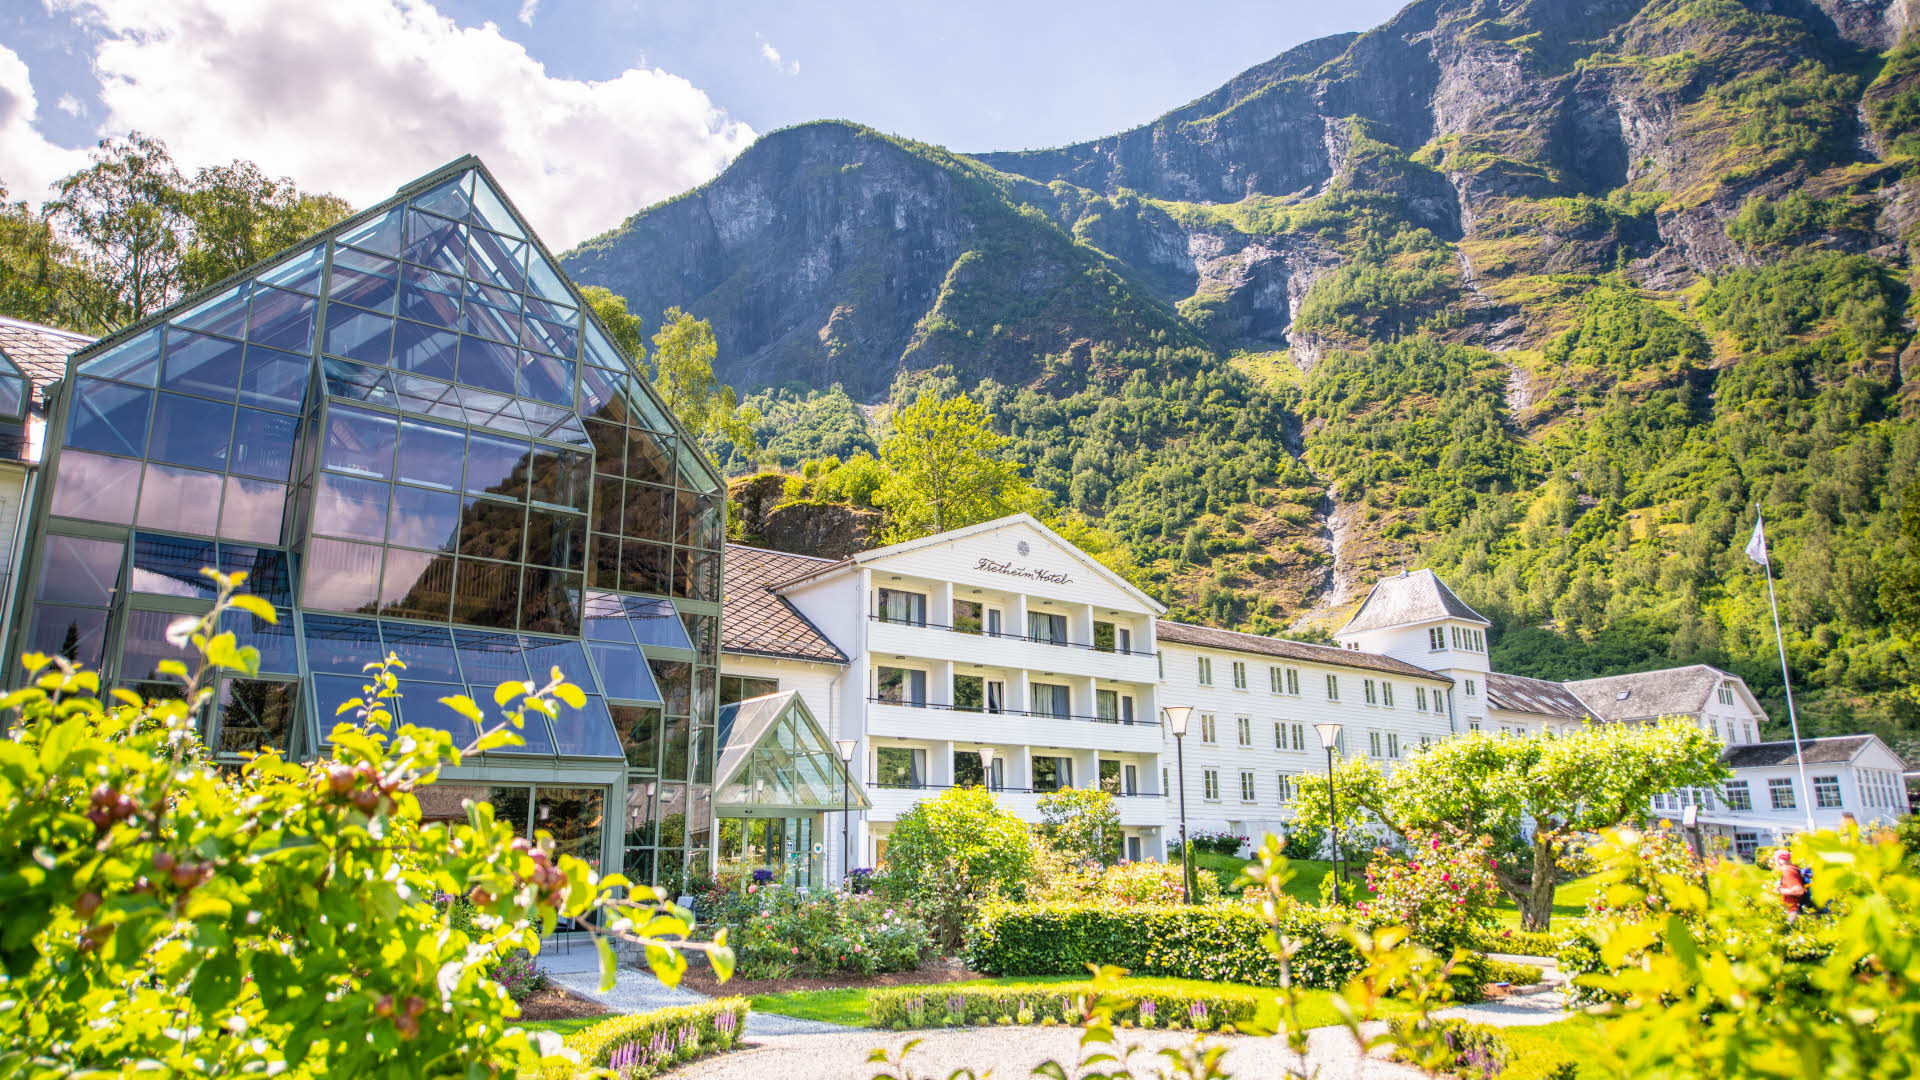 Exterior of Fretheim Hotel. Garden in front and mountains behind.